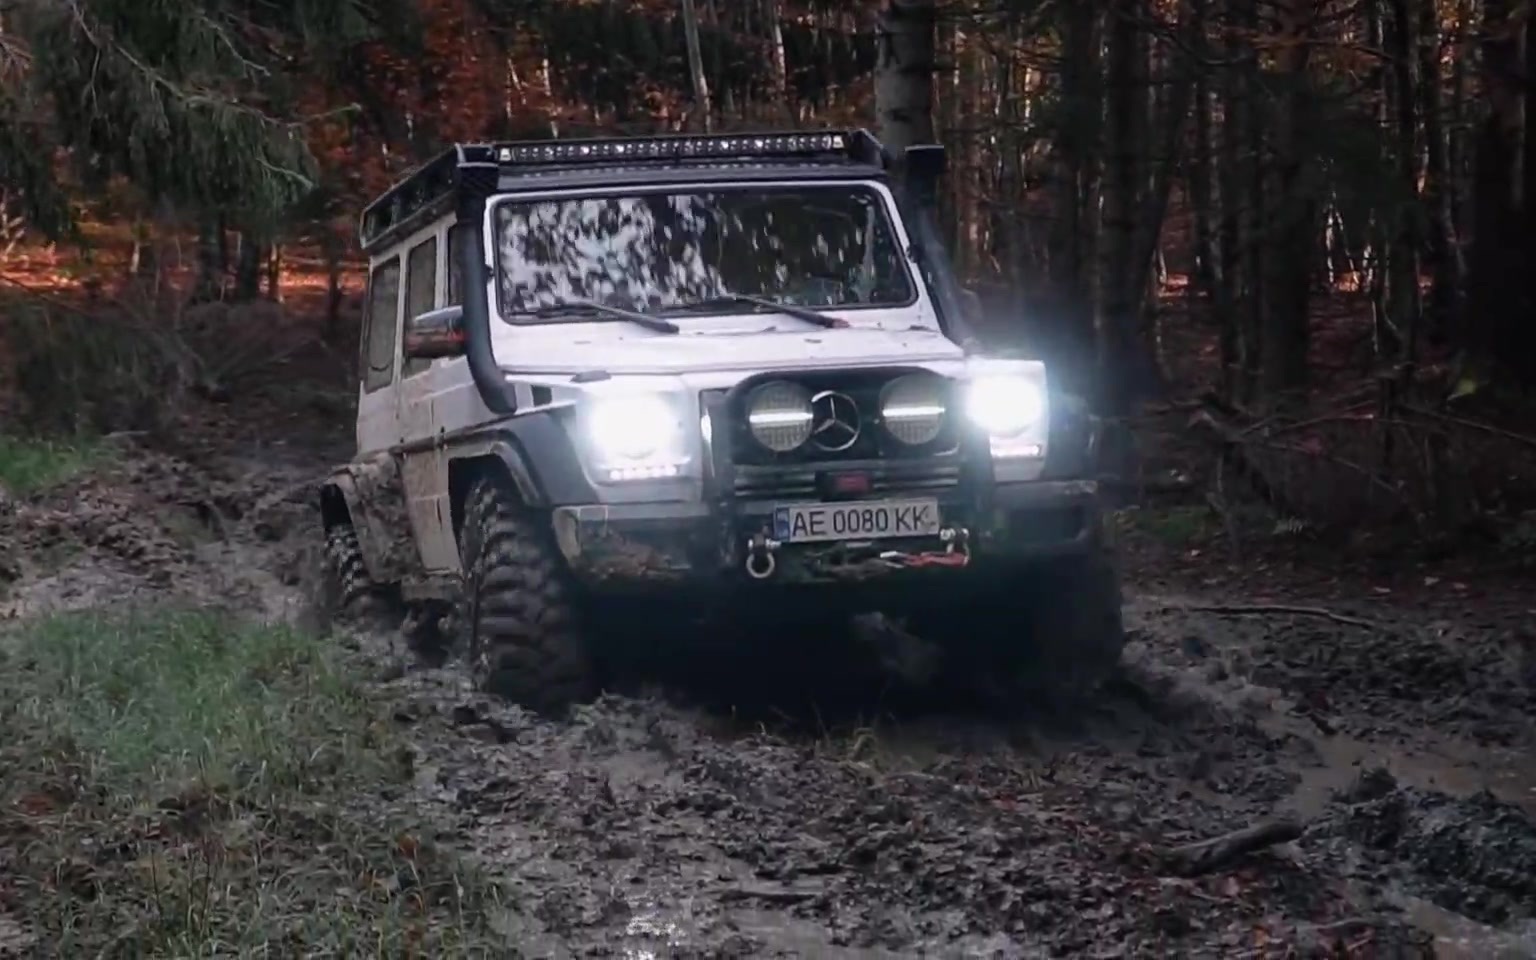 NEW OFF ROAD TESTS FOR CAR IN YAREMCHE